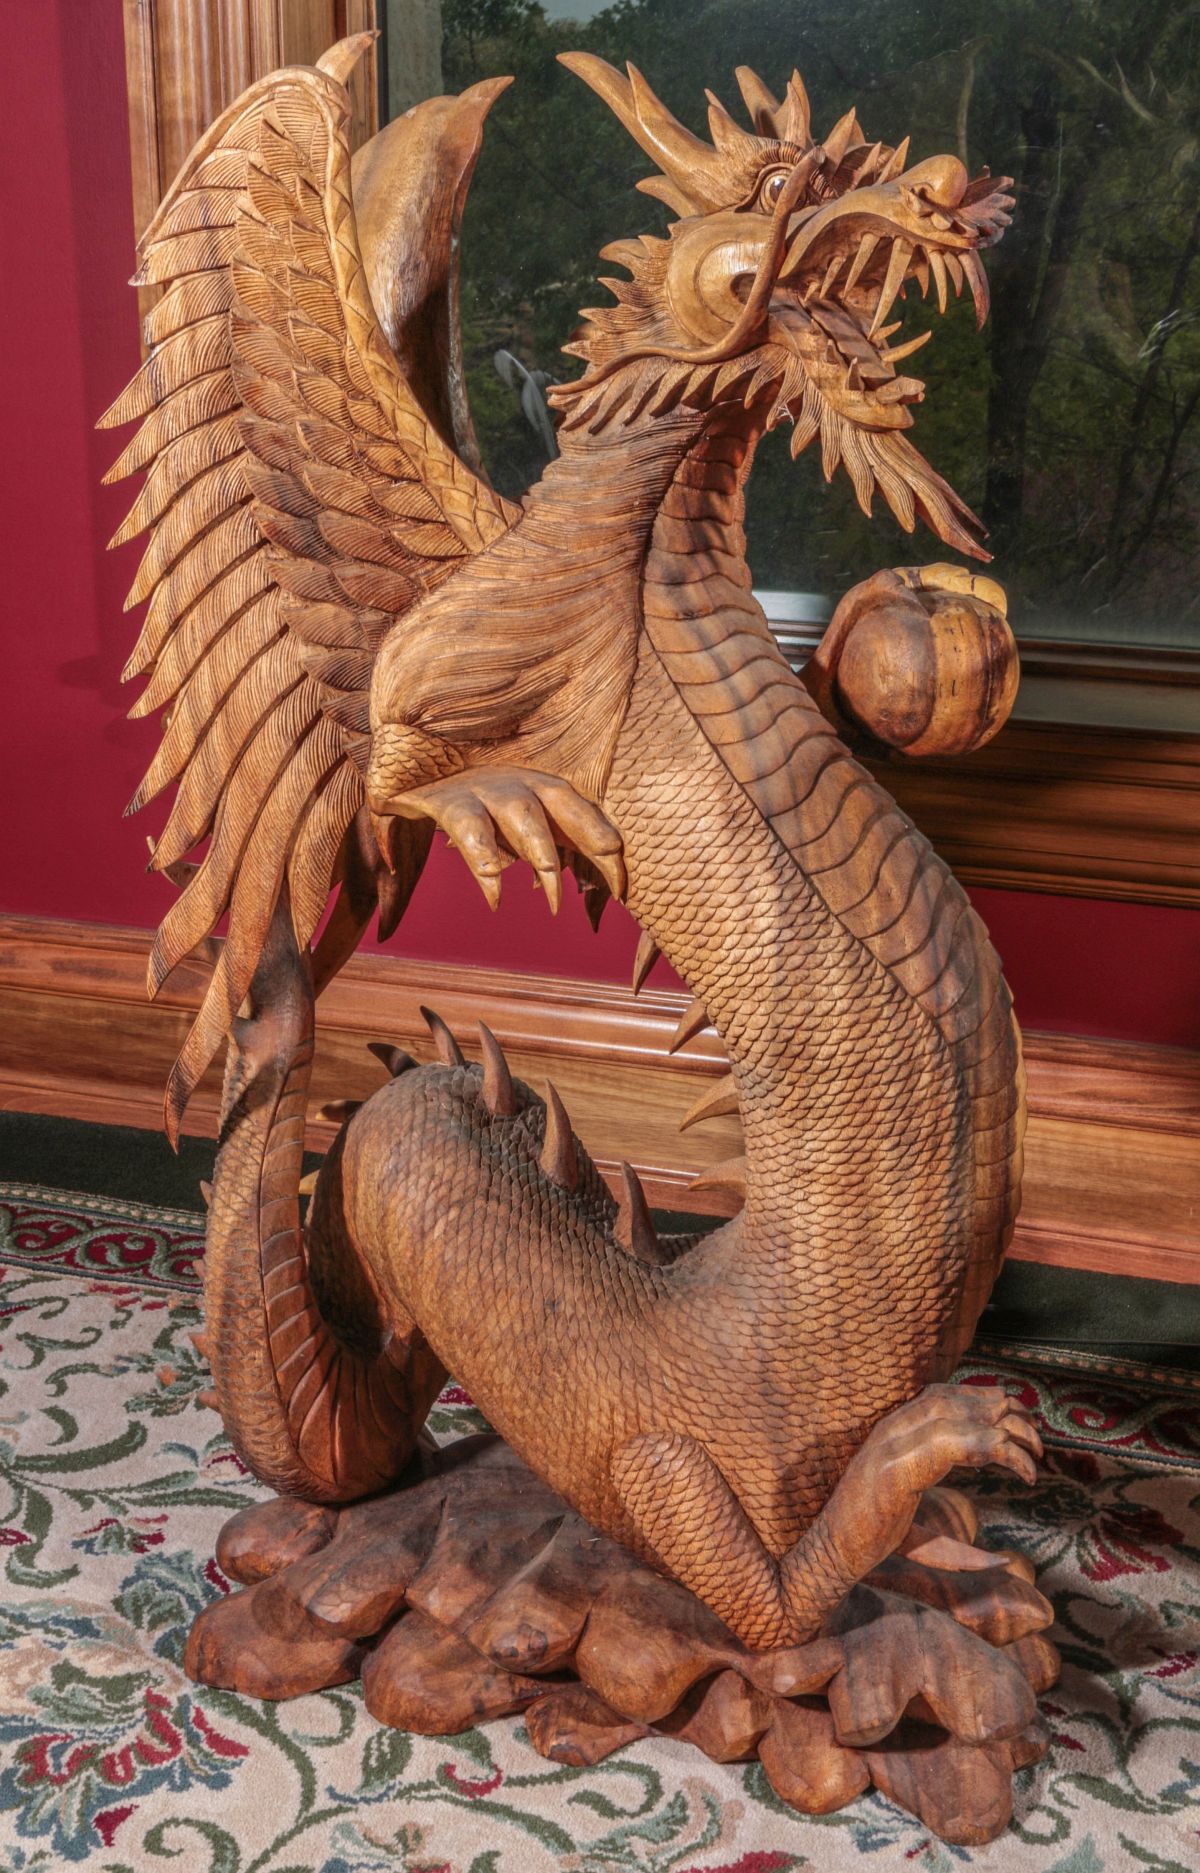 A LARGE AND DETAILED 40-INCH DRAGON WOOD CARVING